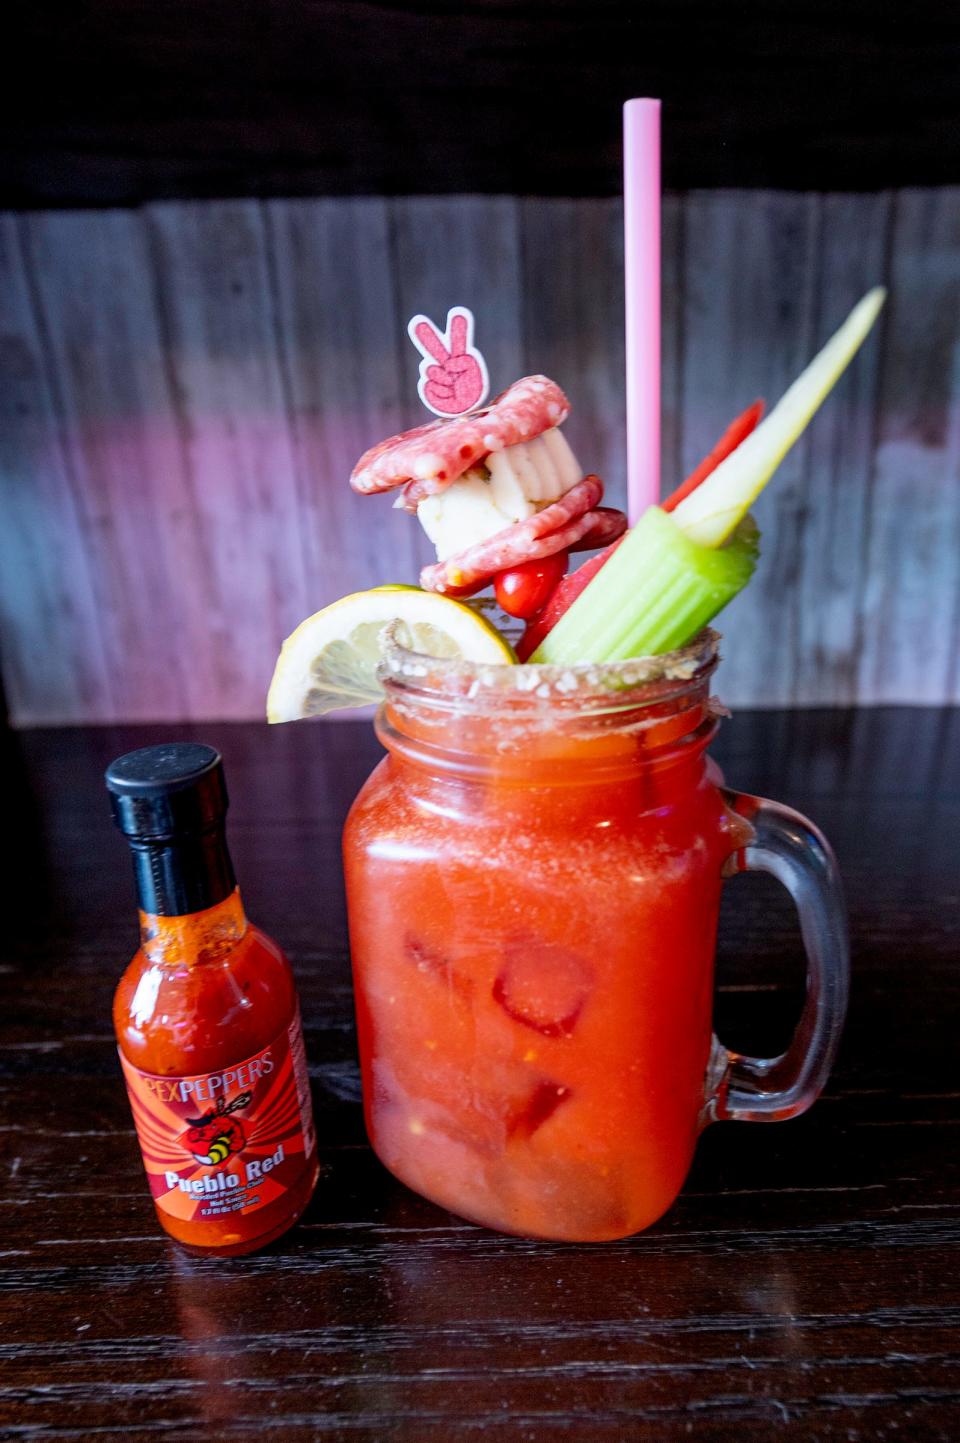 Ruby's entry for the Spice Up Spring competition was the Pueblo Mary cocktail featuring PexPeppers Pueblo Red hot sauce.